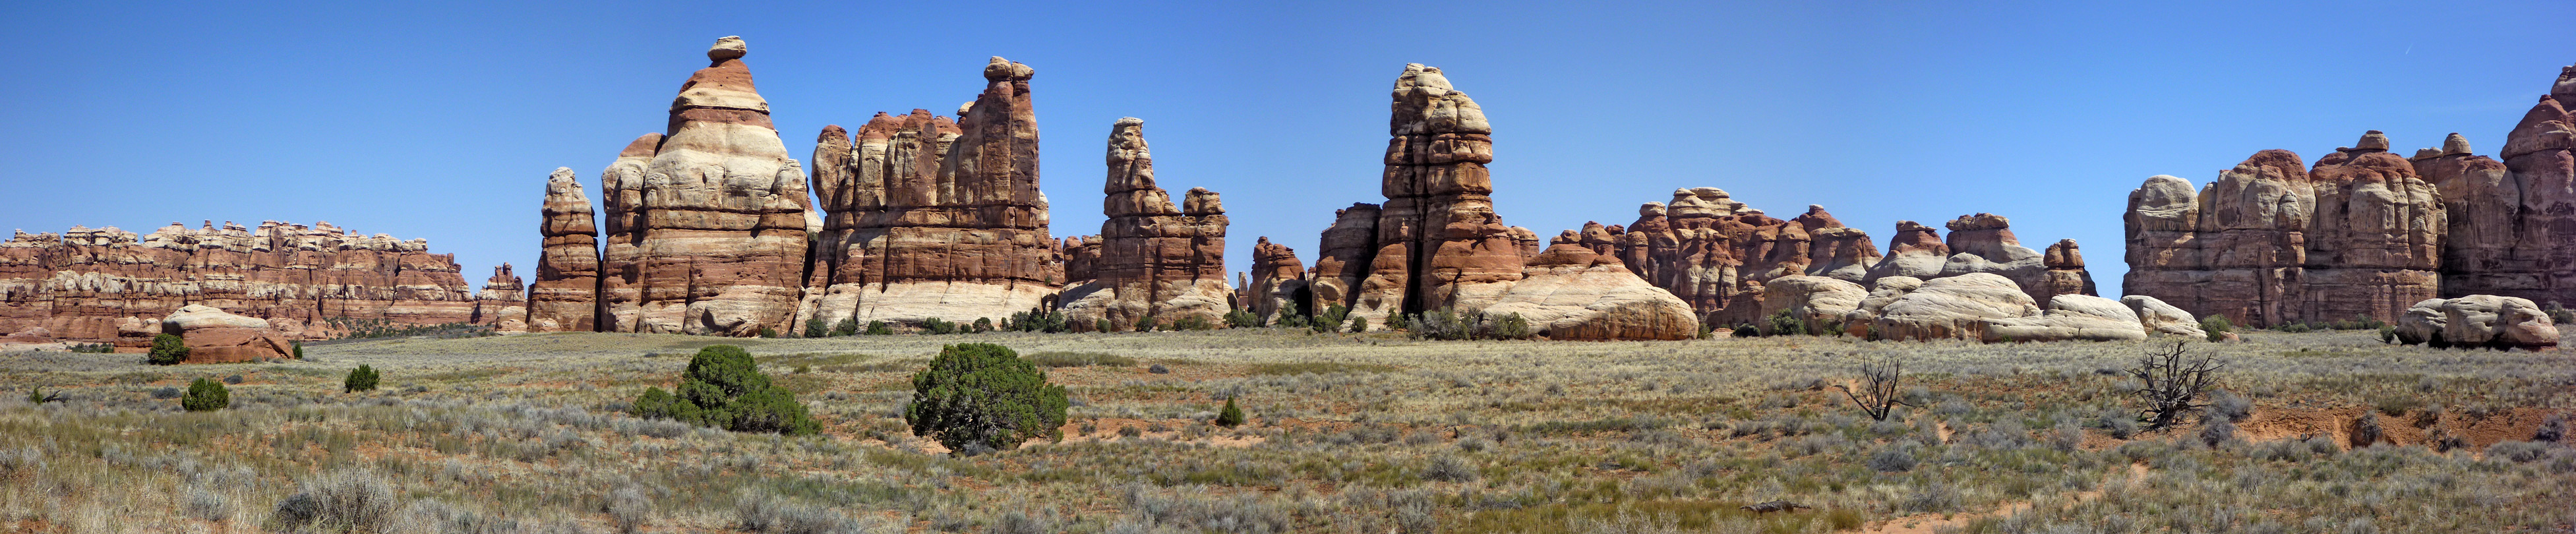 Formations in Chesler Park